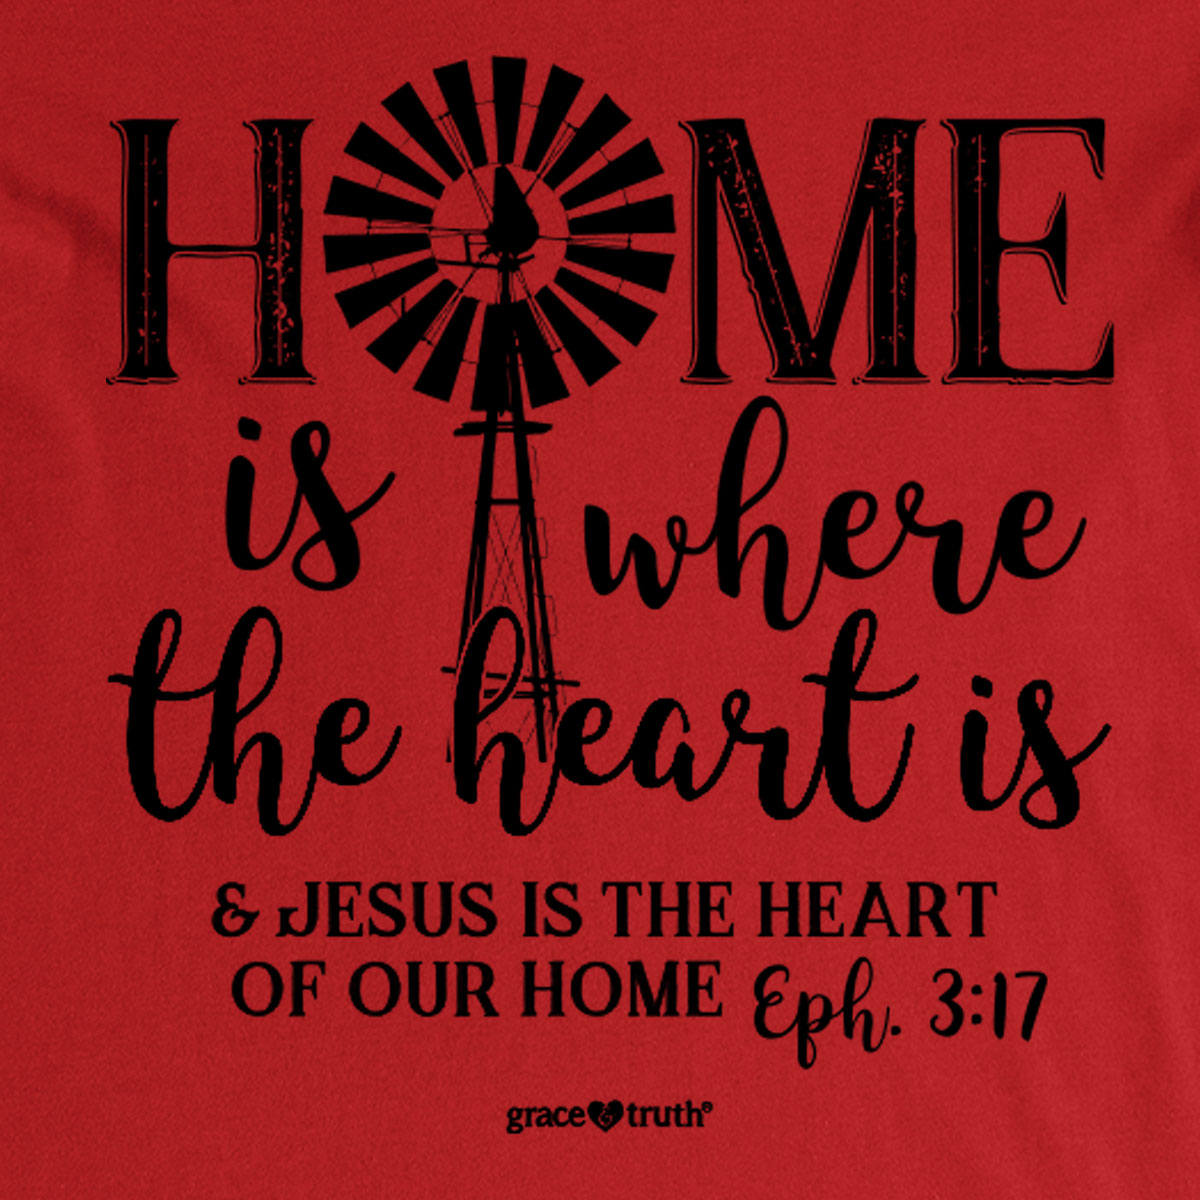 grace & truth Womens V-Neck T-Shirt Home Is Where The Heart Is